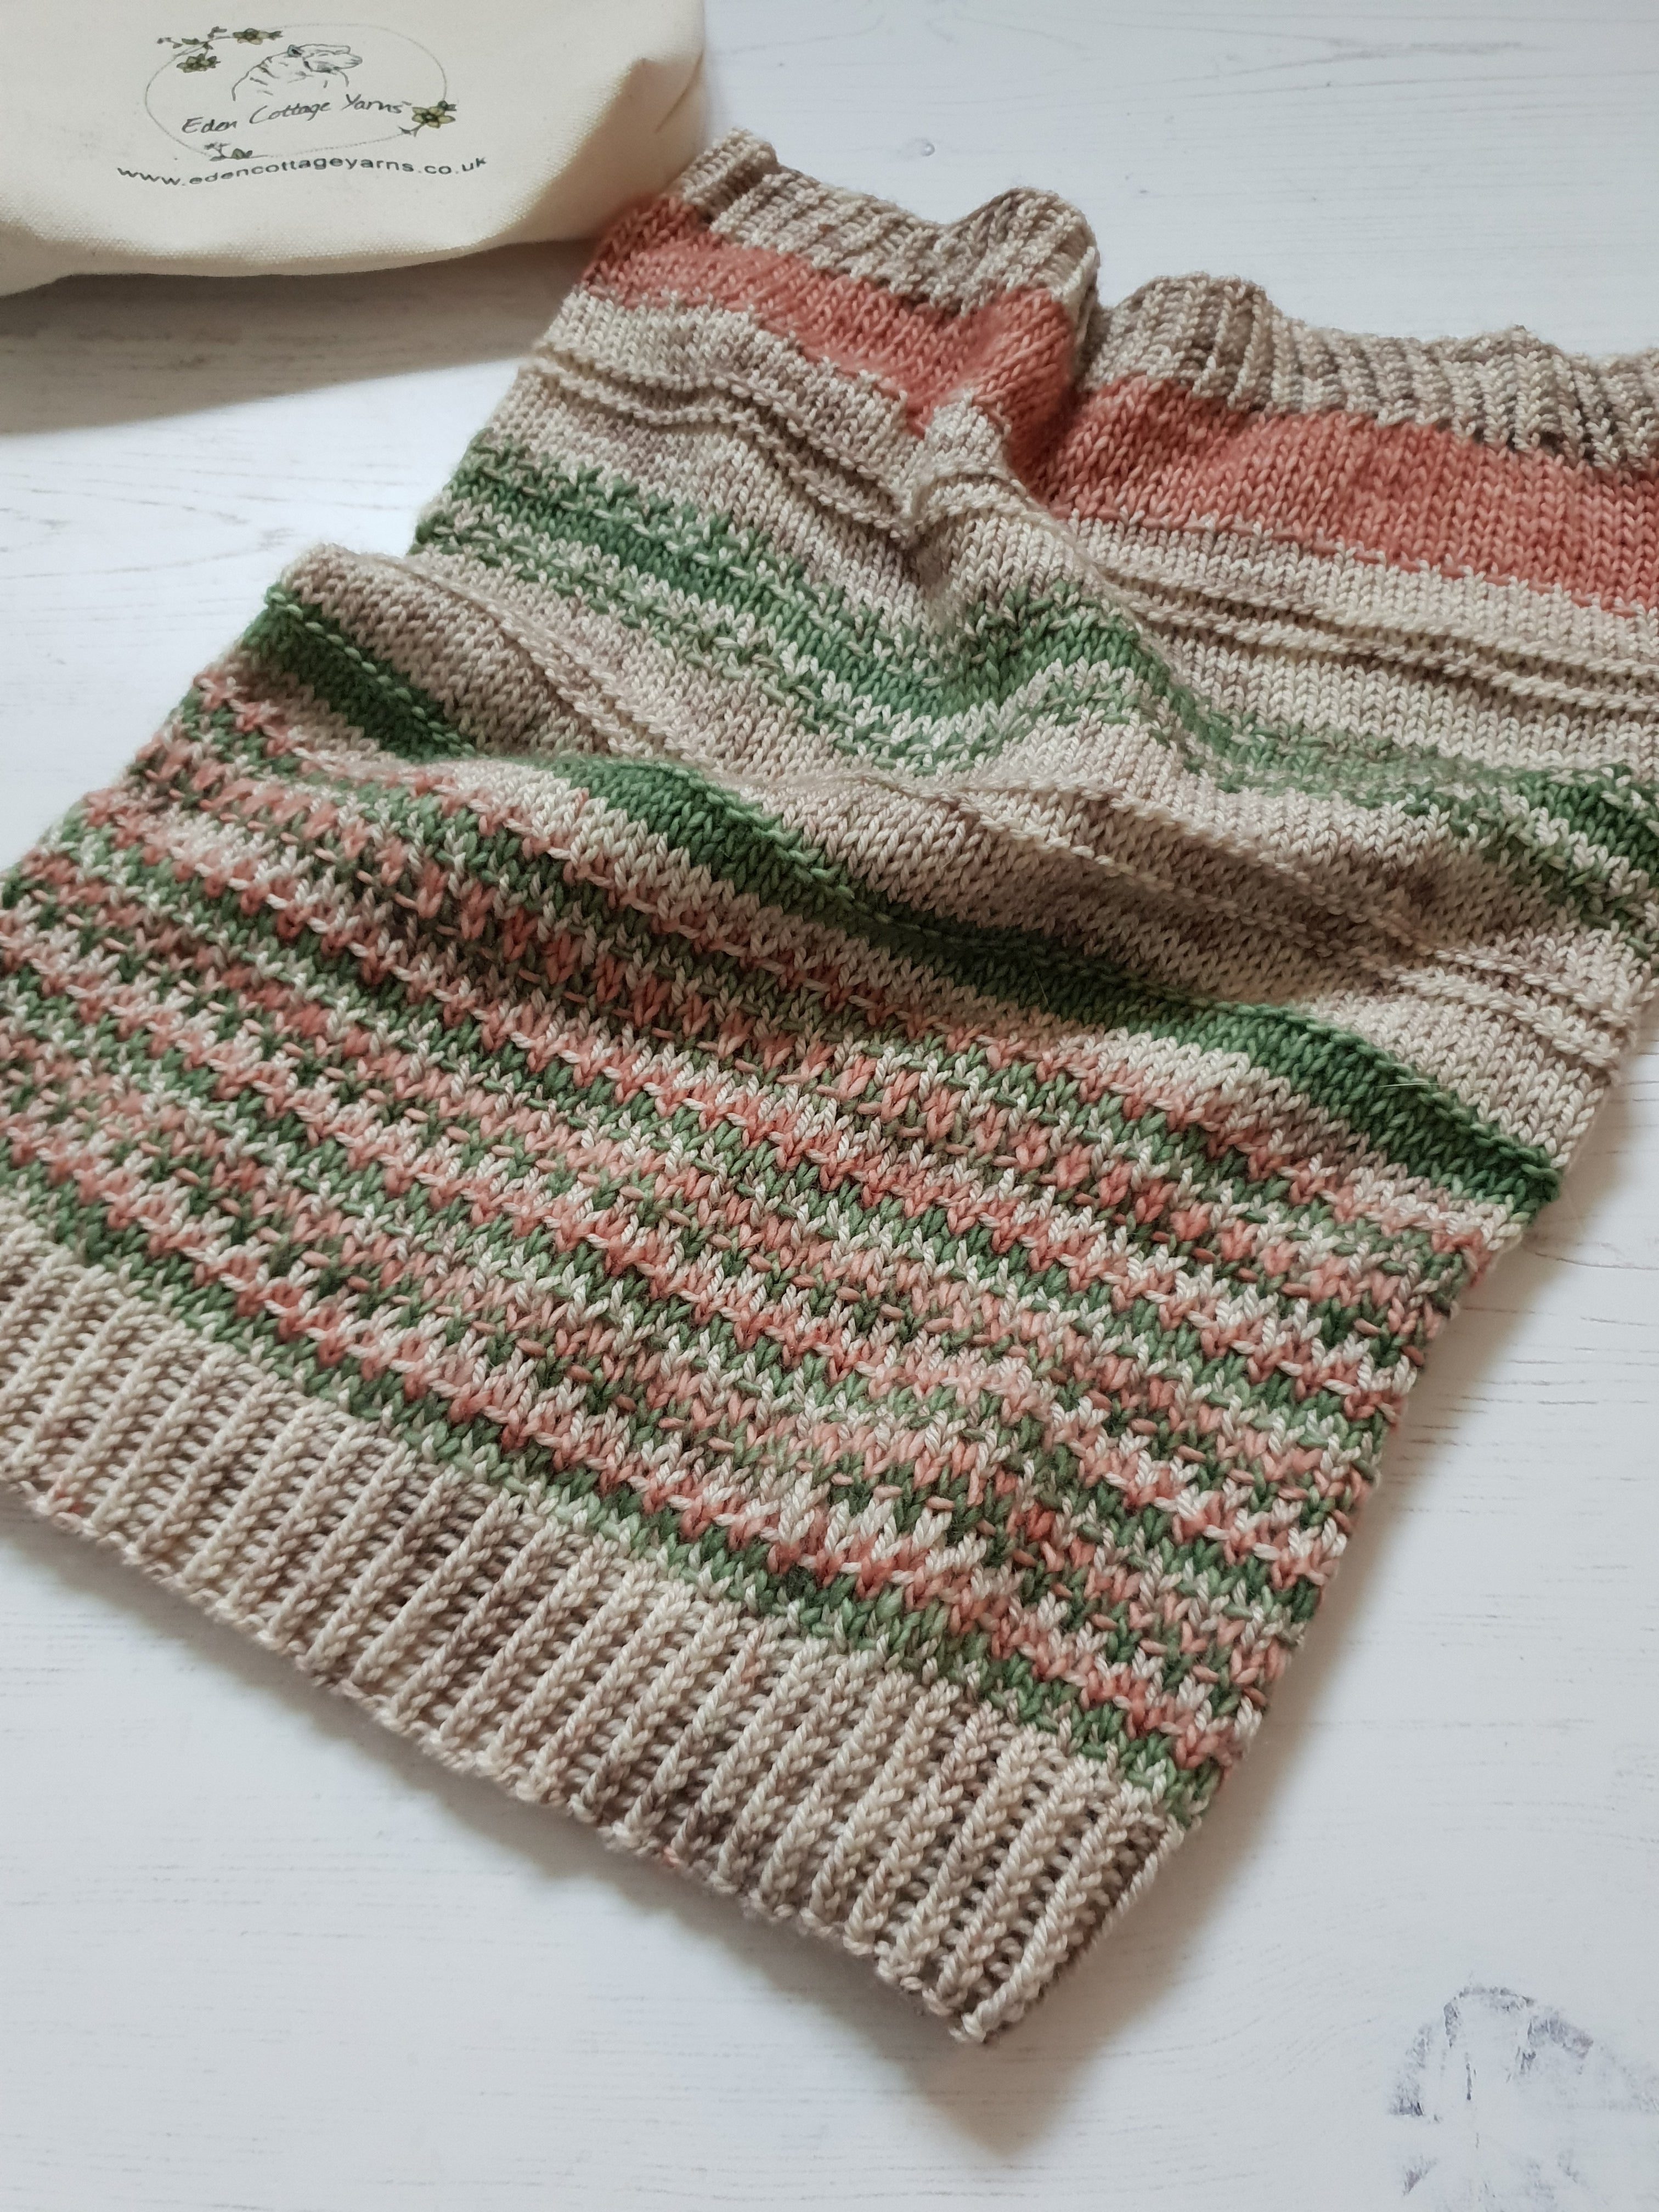 A beige cowl with red and green colourwork details